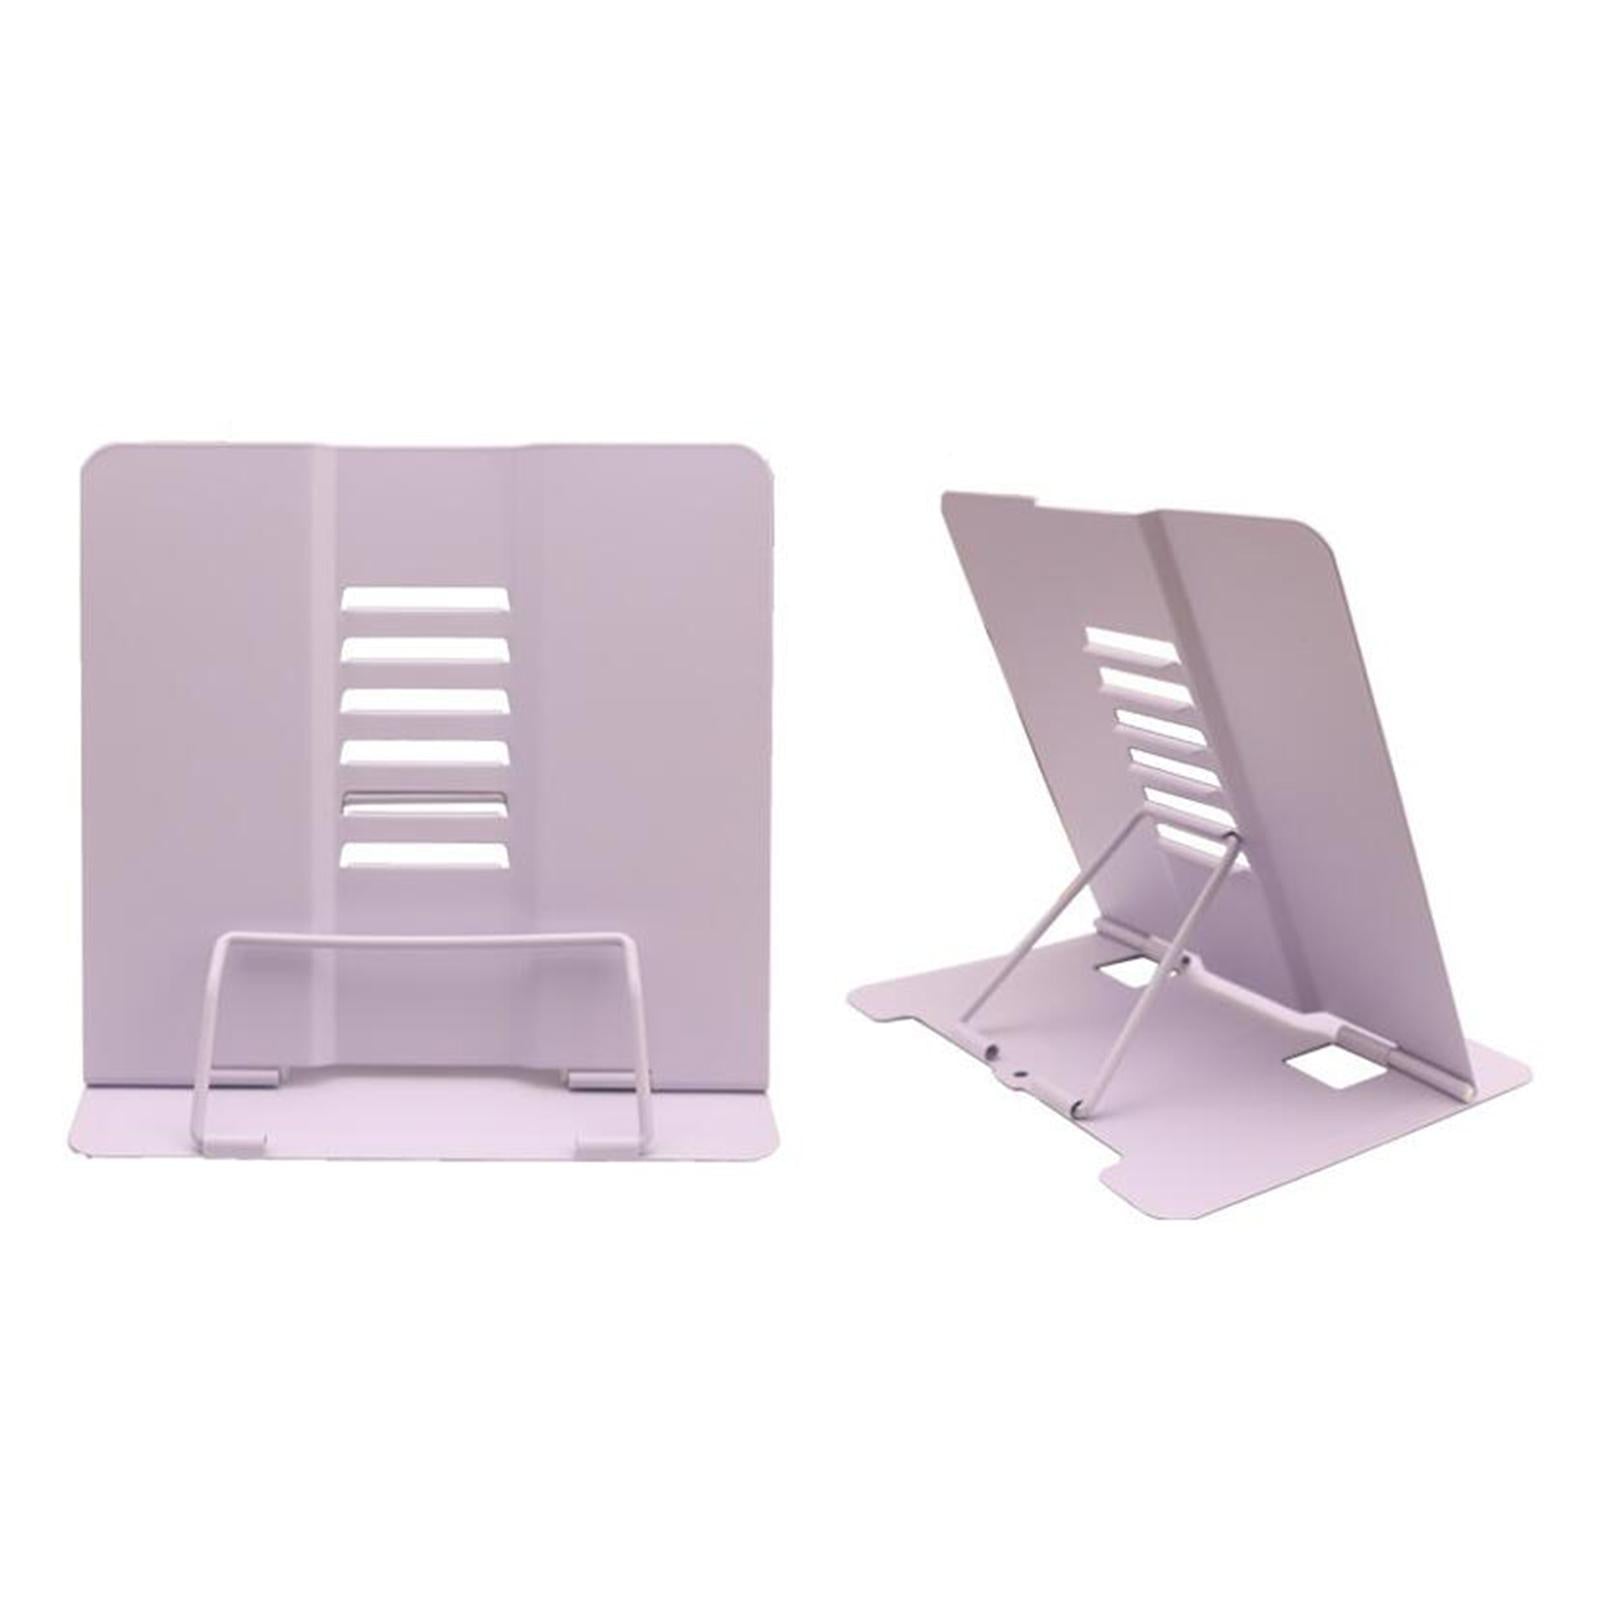 Portable Reading Stand Book Stand Document Holder Rack Adjustable Height Purple